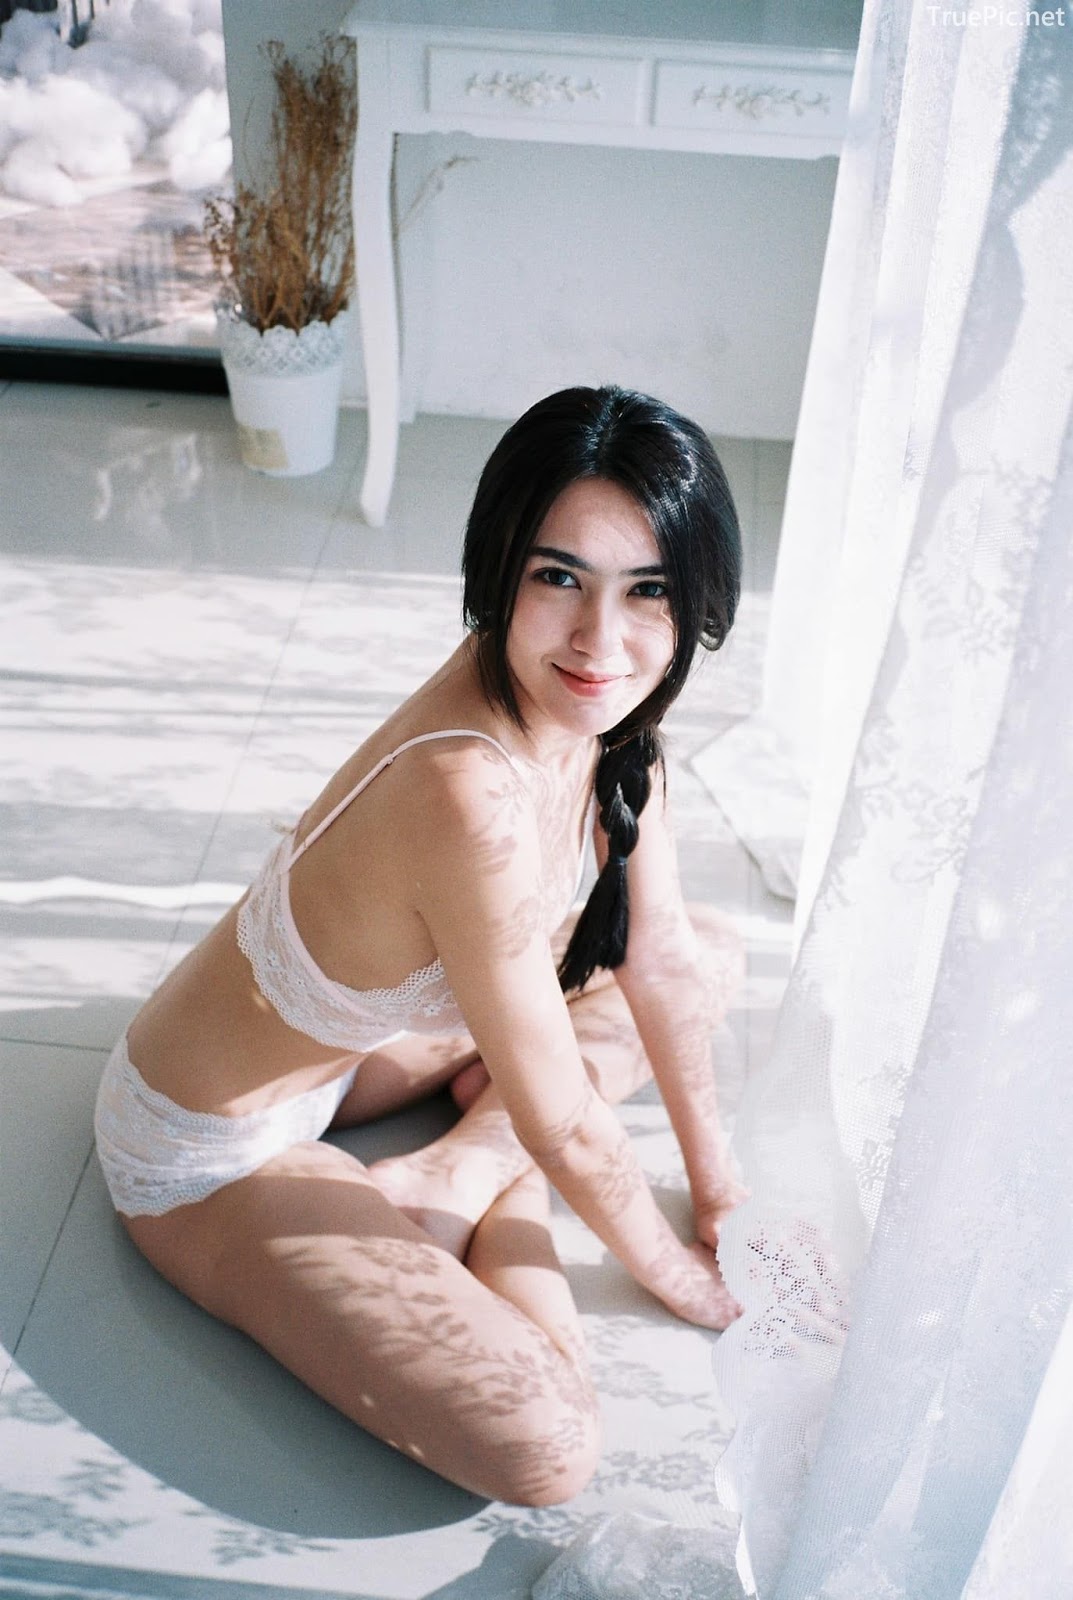 Thailand Hot model - Baifern Rinrucha Kamnark - Sexy in Transparent Lace Lingerie - TruePic.net - Picture 12